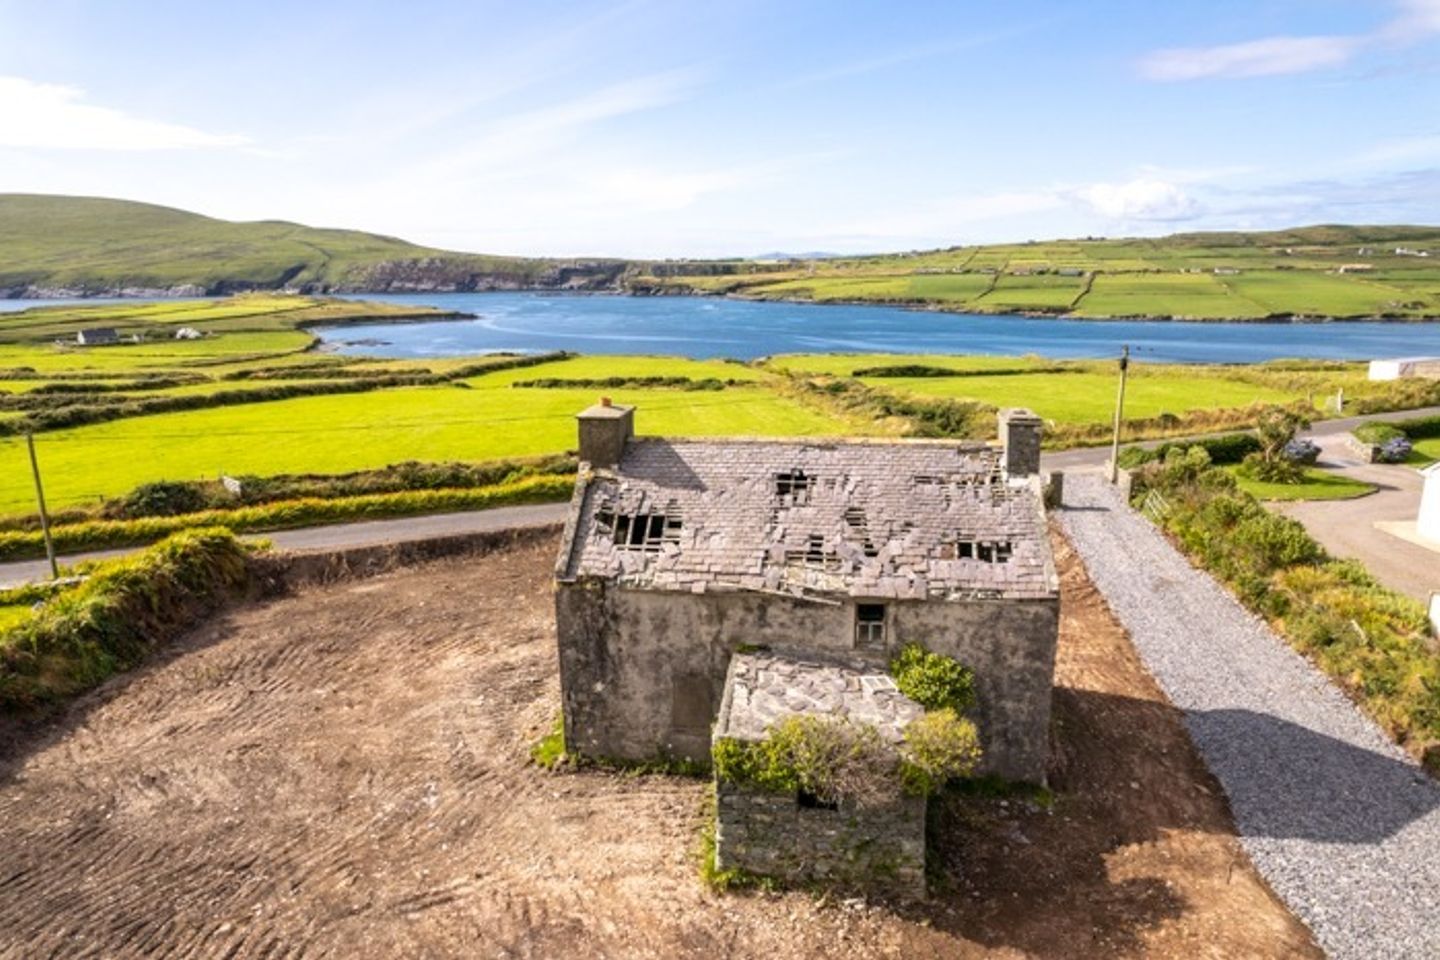 Ref 1087 - Old Farmhouse & Ruins, New Road, Portmagee, Co. Kerry